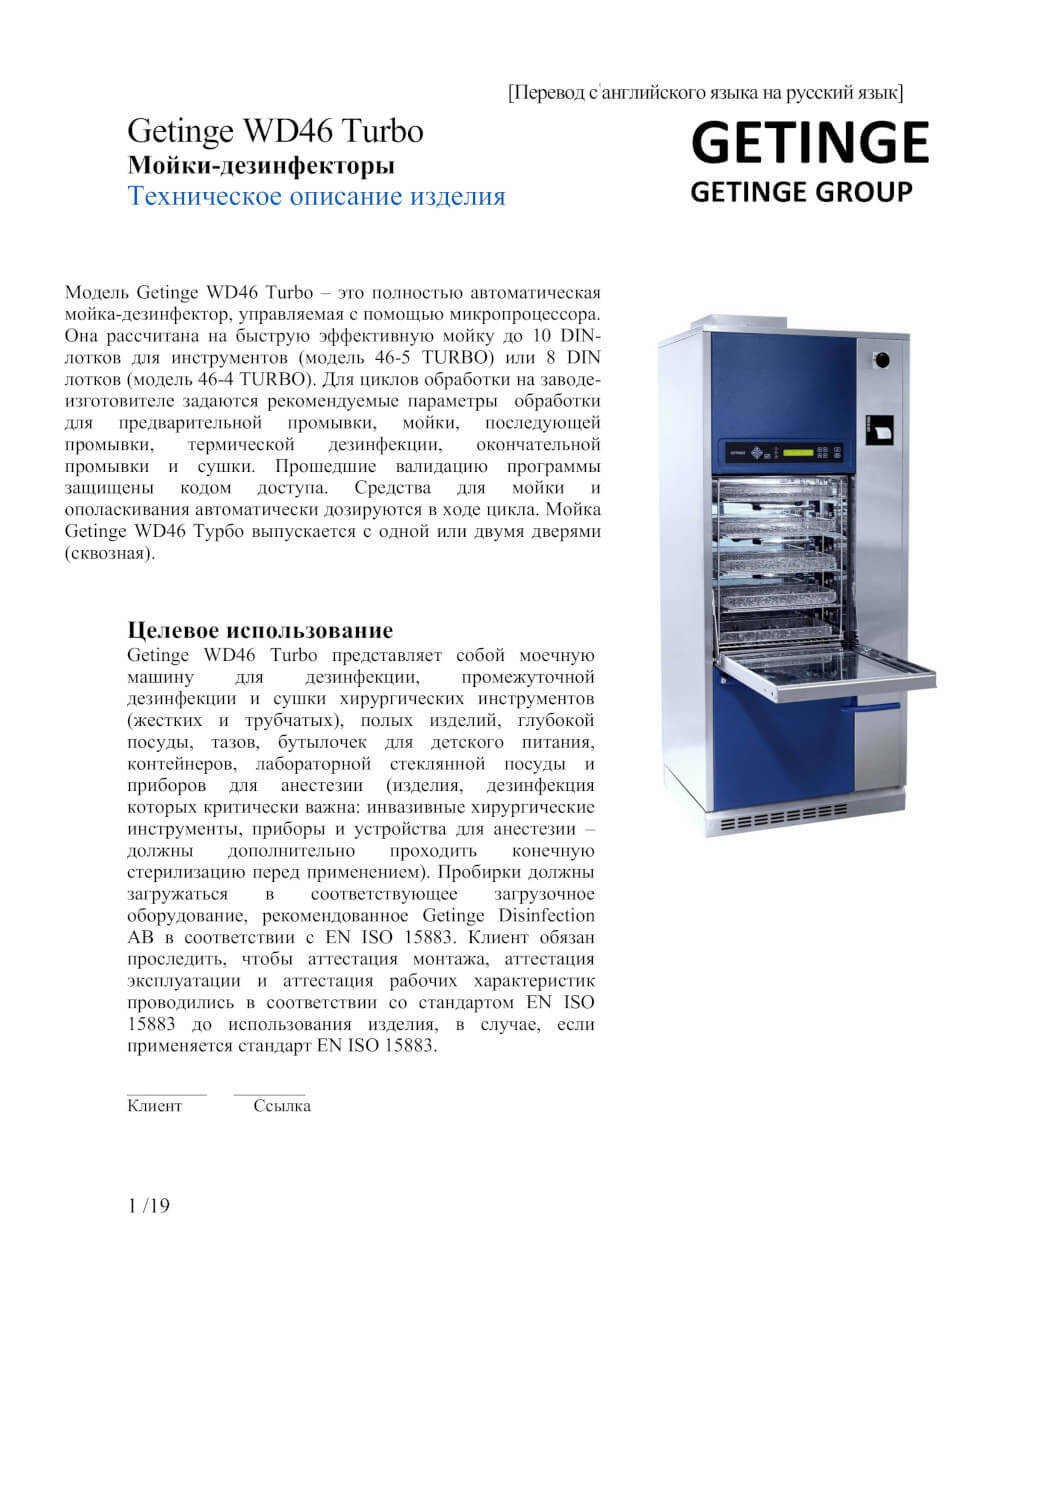 English product catalogue after being translated into russian (with basic formatting)